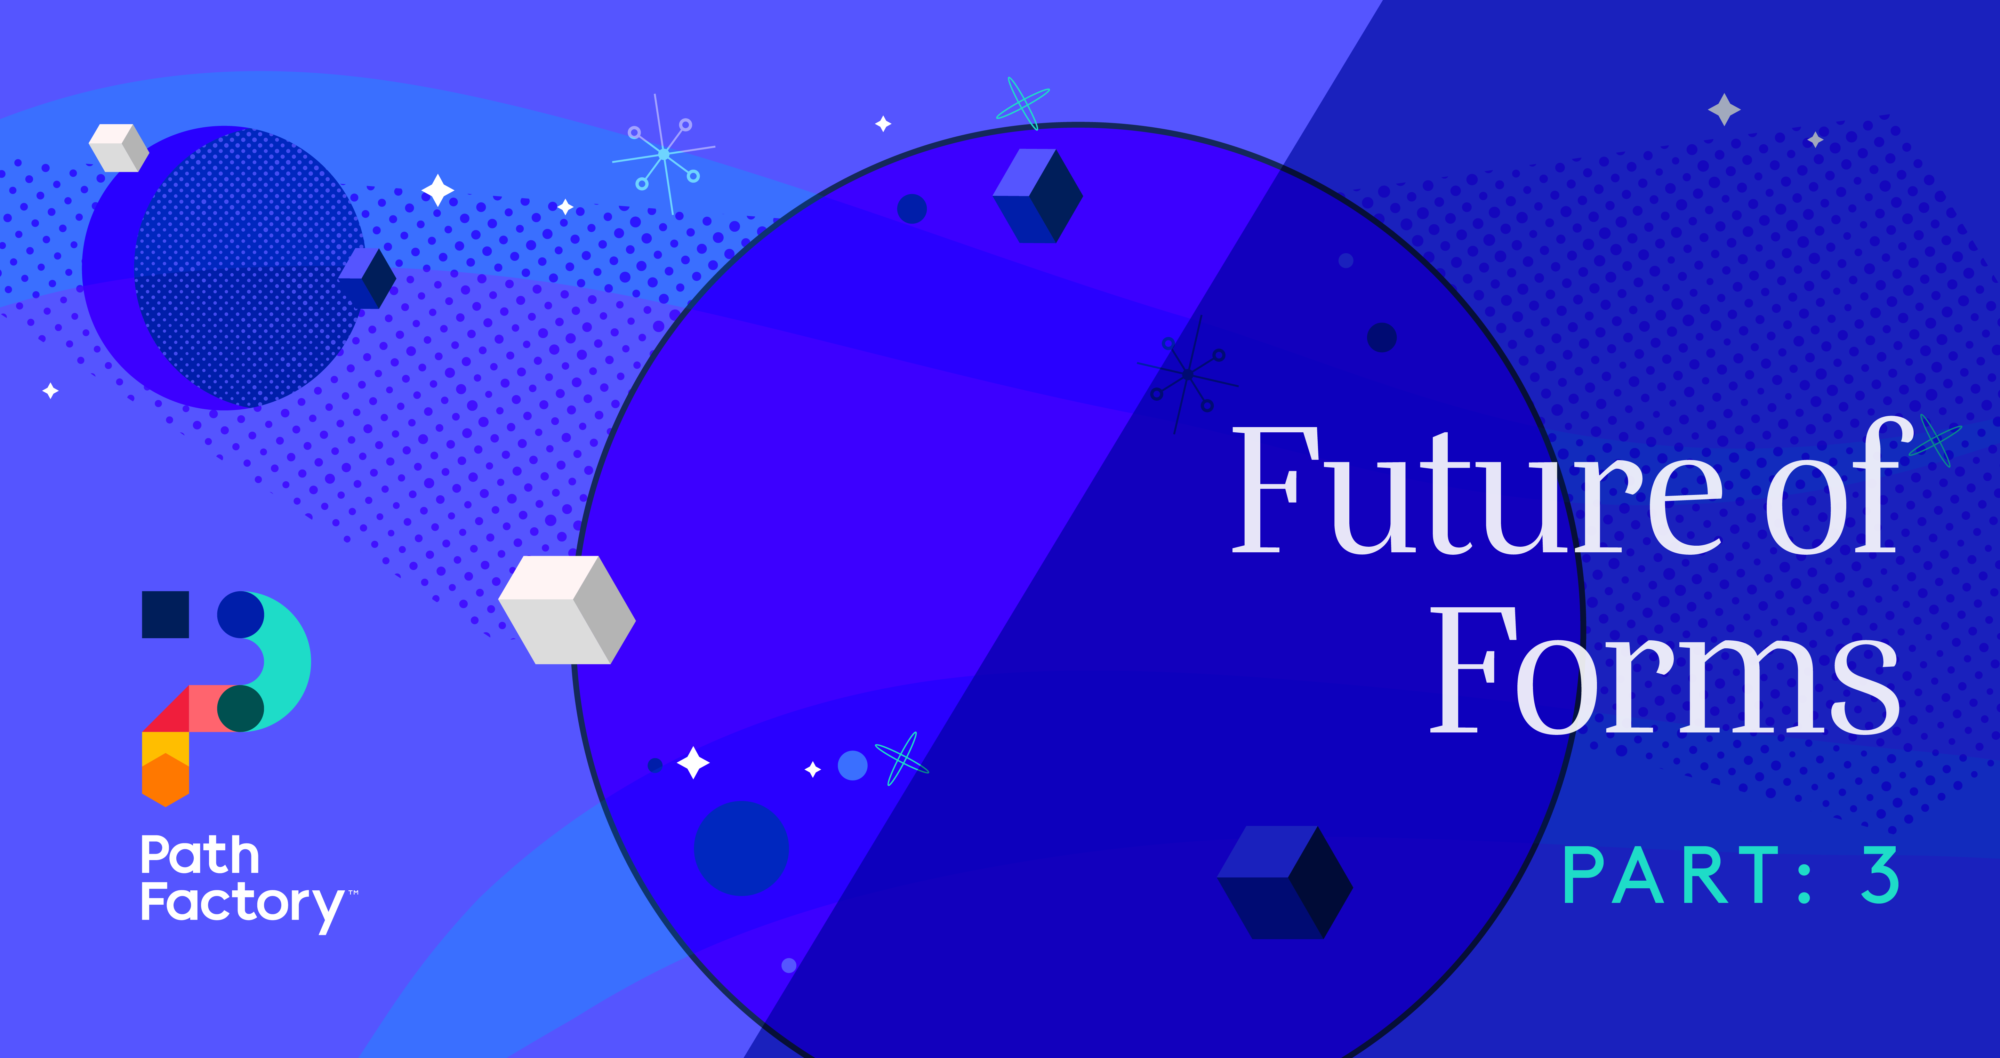 Future of Forms, Part 3. Decorative Blue circles and White Cubes on a Blue Background with a PathFactory logo on the bottom right